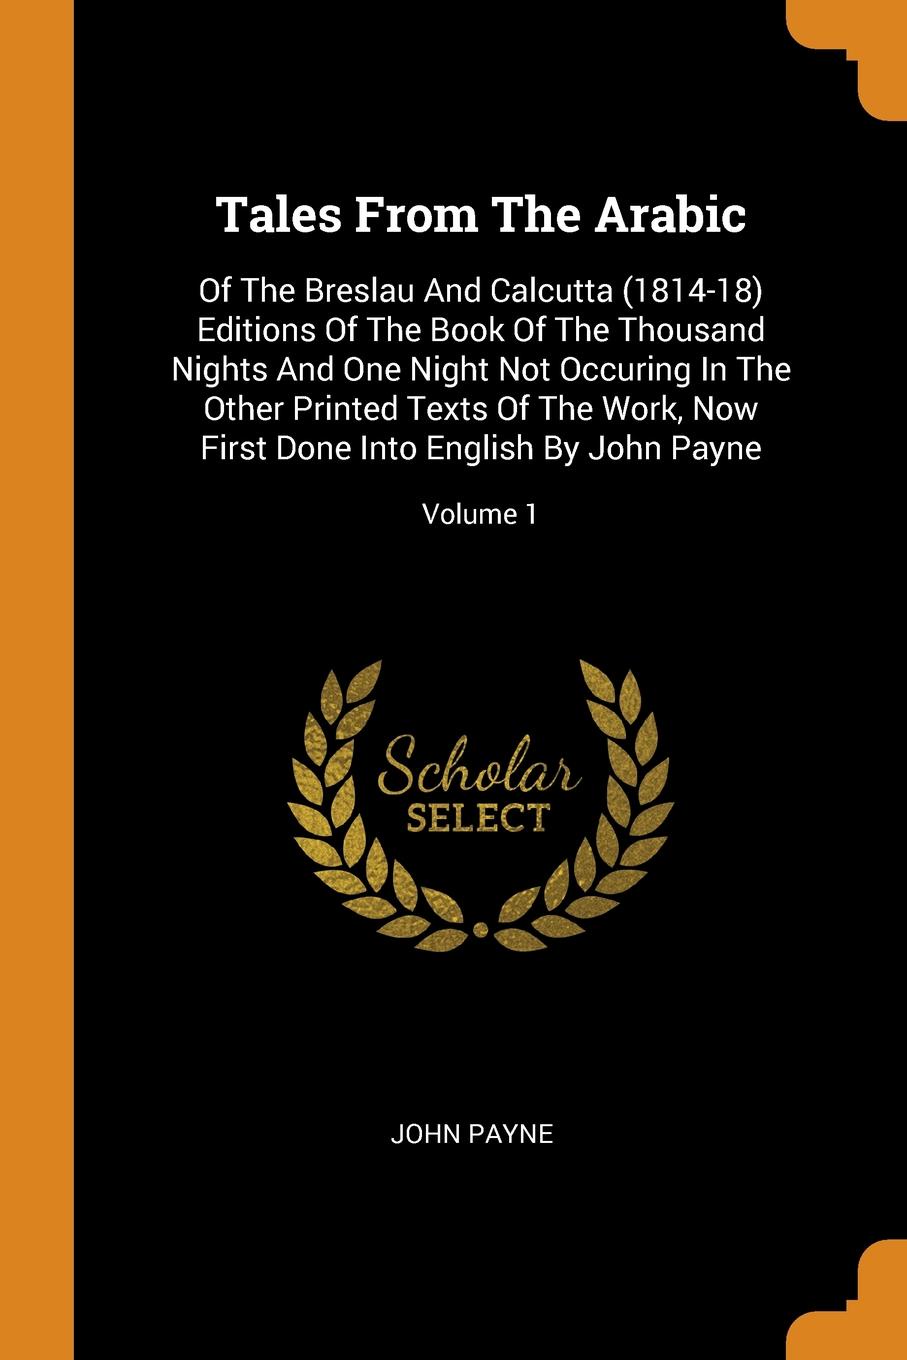 Tales From The Arabic. Of The Breslau And Calcutta (1814-18) Editions Of The Book Of The Thousand Nights And One Night Not Occuring In The Other Printed Texts Of The Work, Now First Done Into English By John Payne; Volume 1